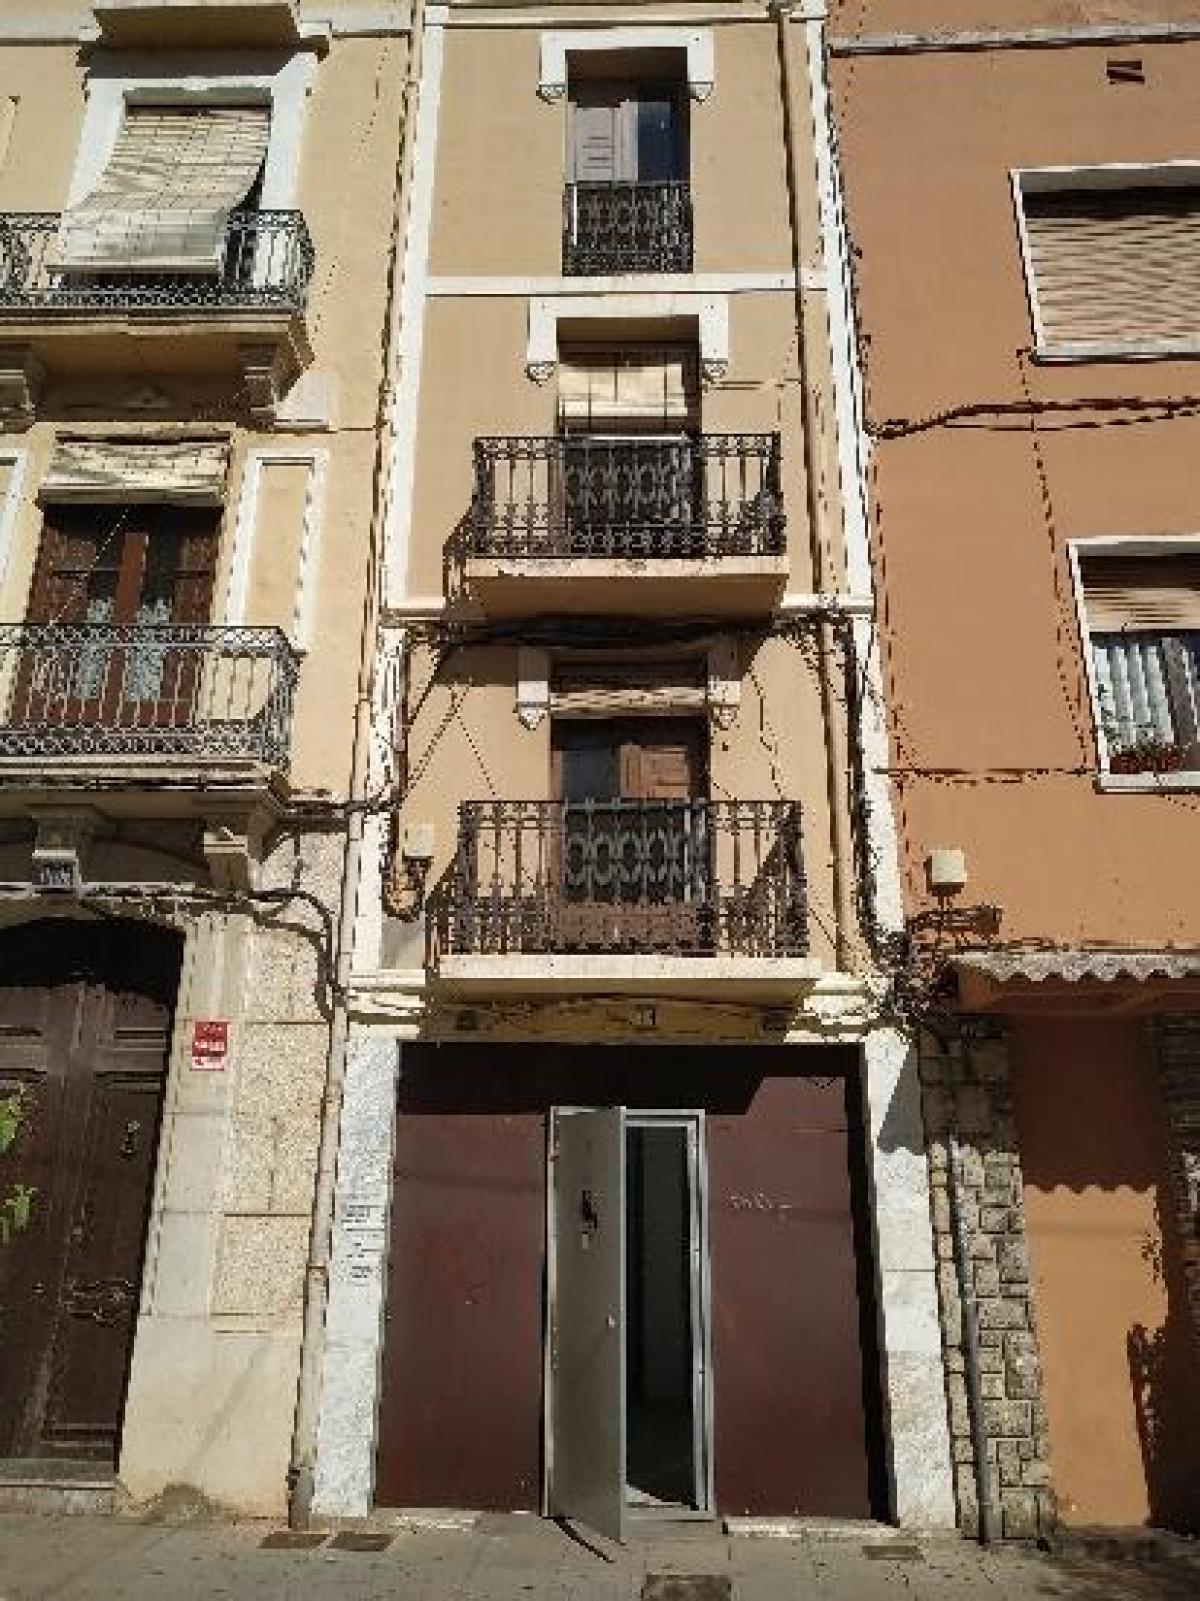 Picture of Apartment For Sale in Vinaros, Castellon, Spain